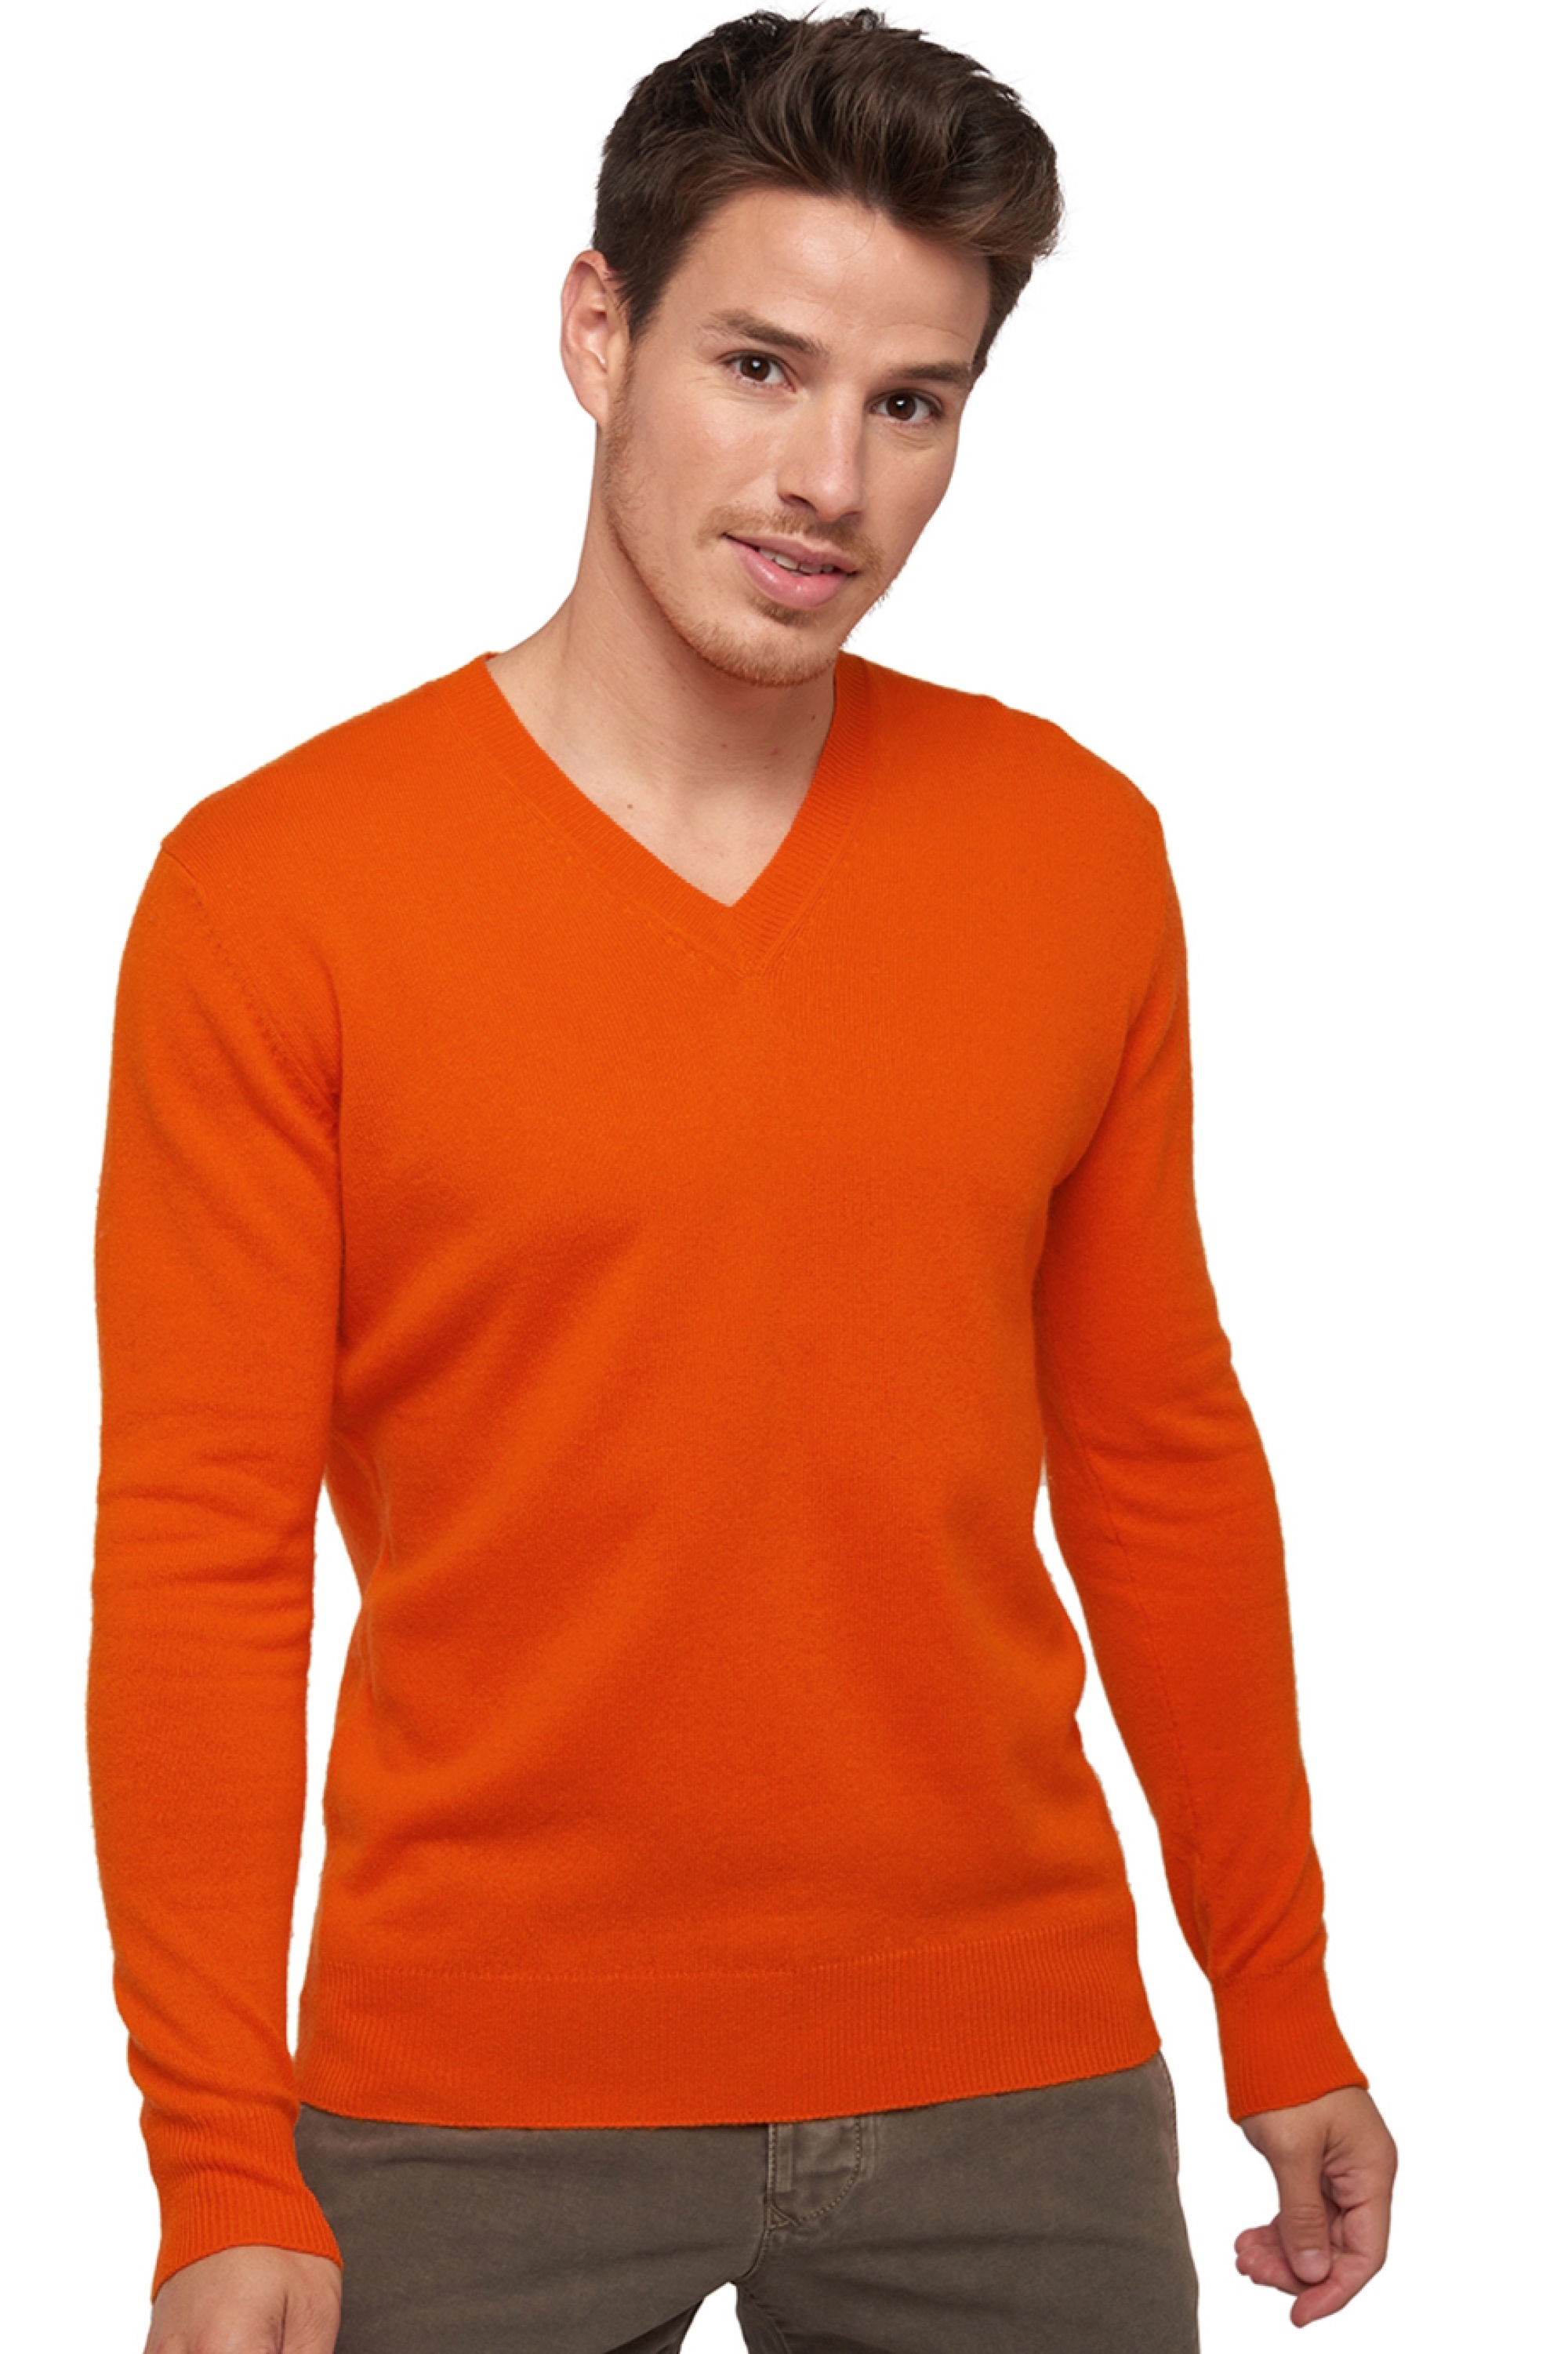 Cashmere men low prices tor first satsuma m